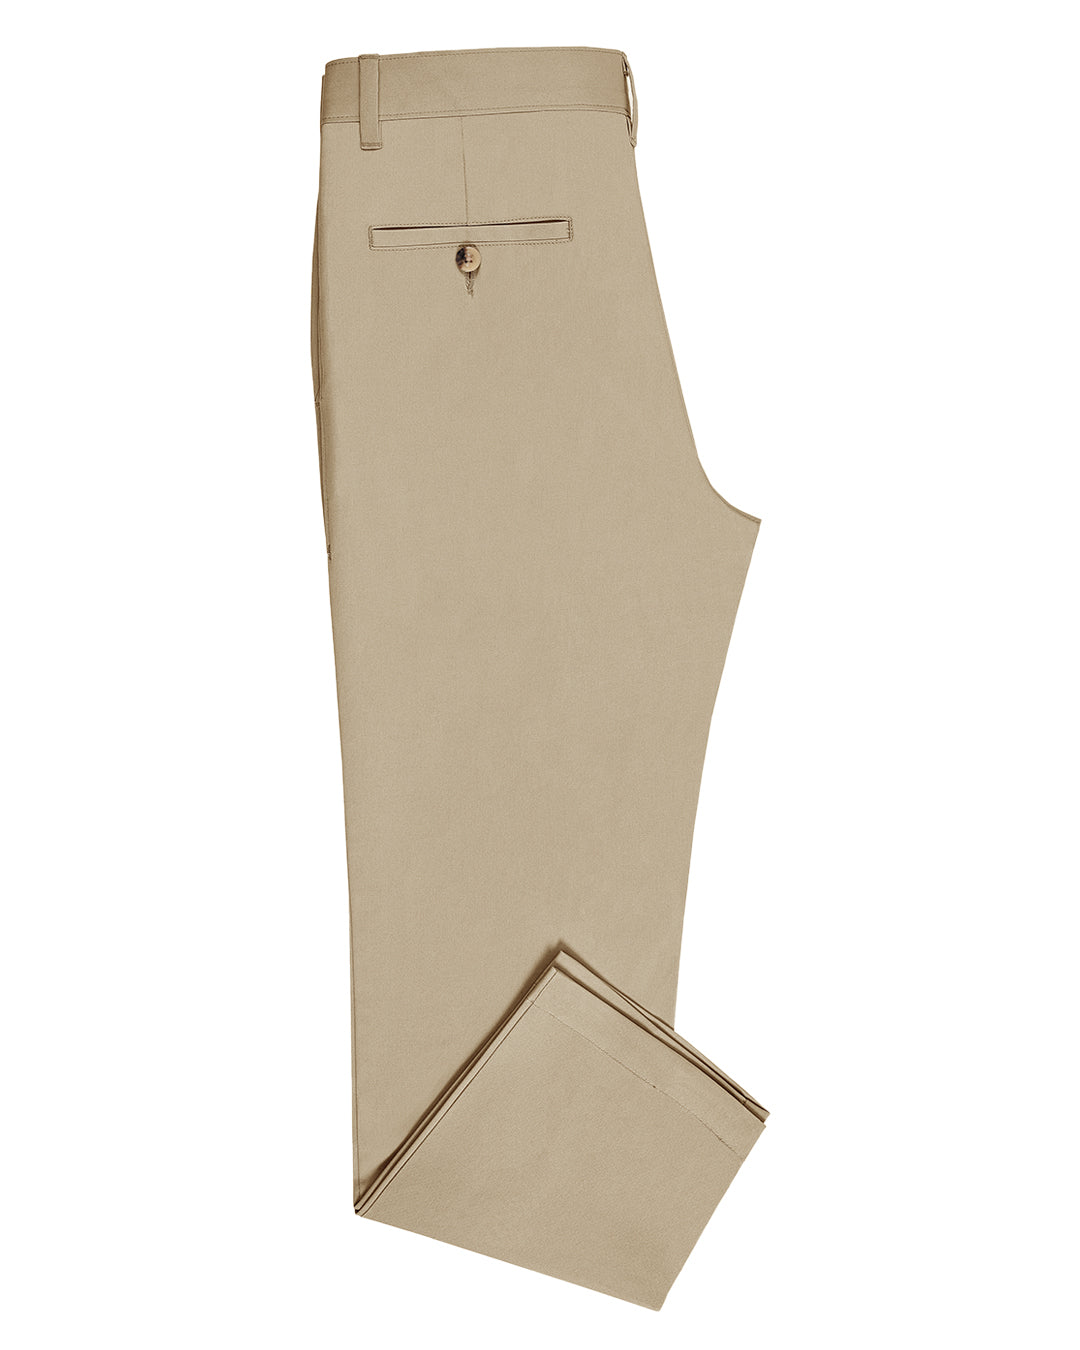 Side view of custom Genoa Chino pants for men by Luxire in British khaki